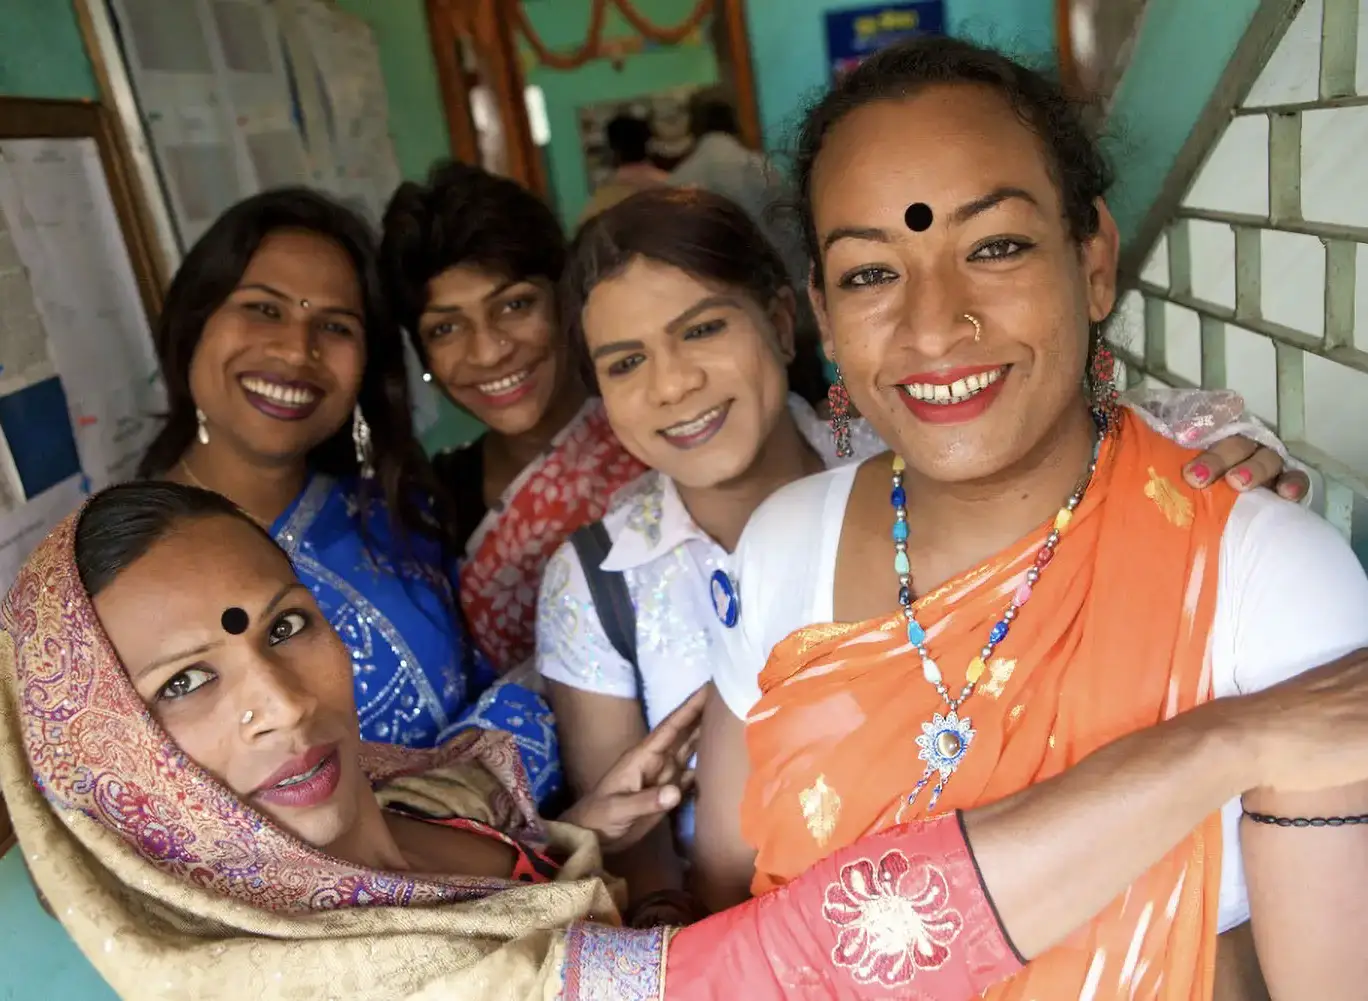 Five South Asian Hijras embracing each other for a group photo. They’re wearing colorful saris and smiling at the camera.